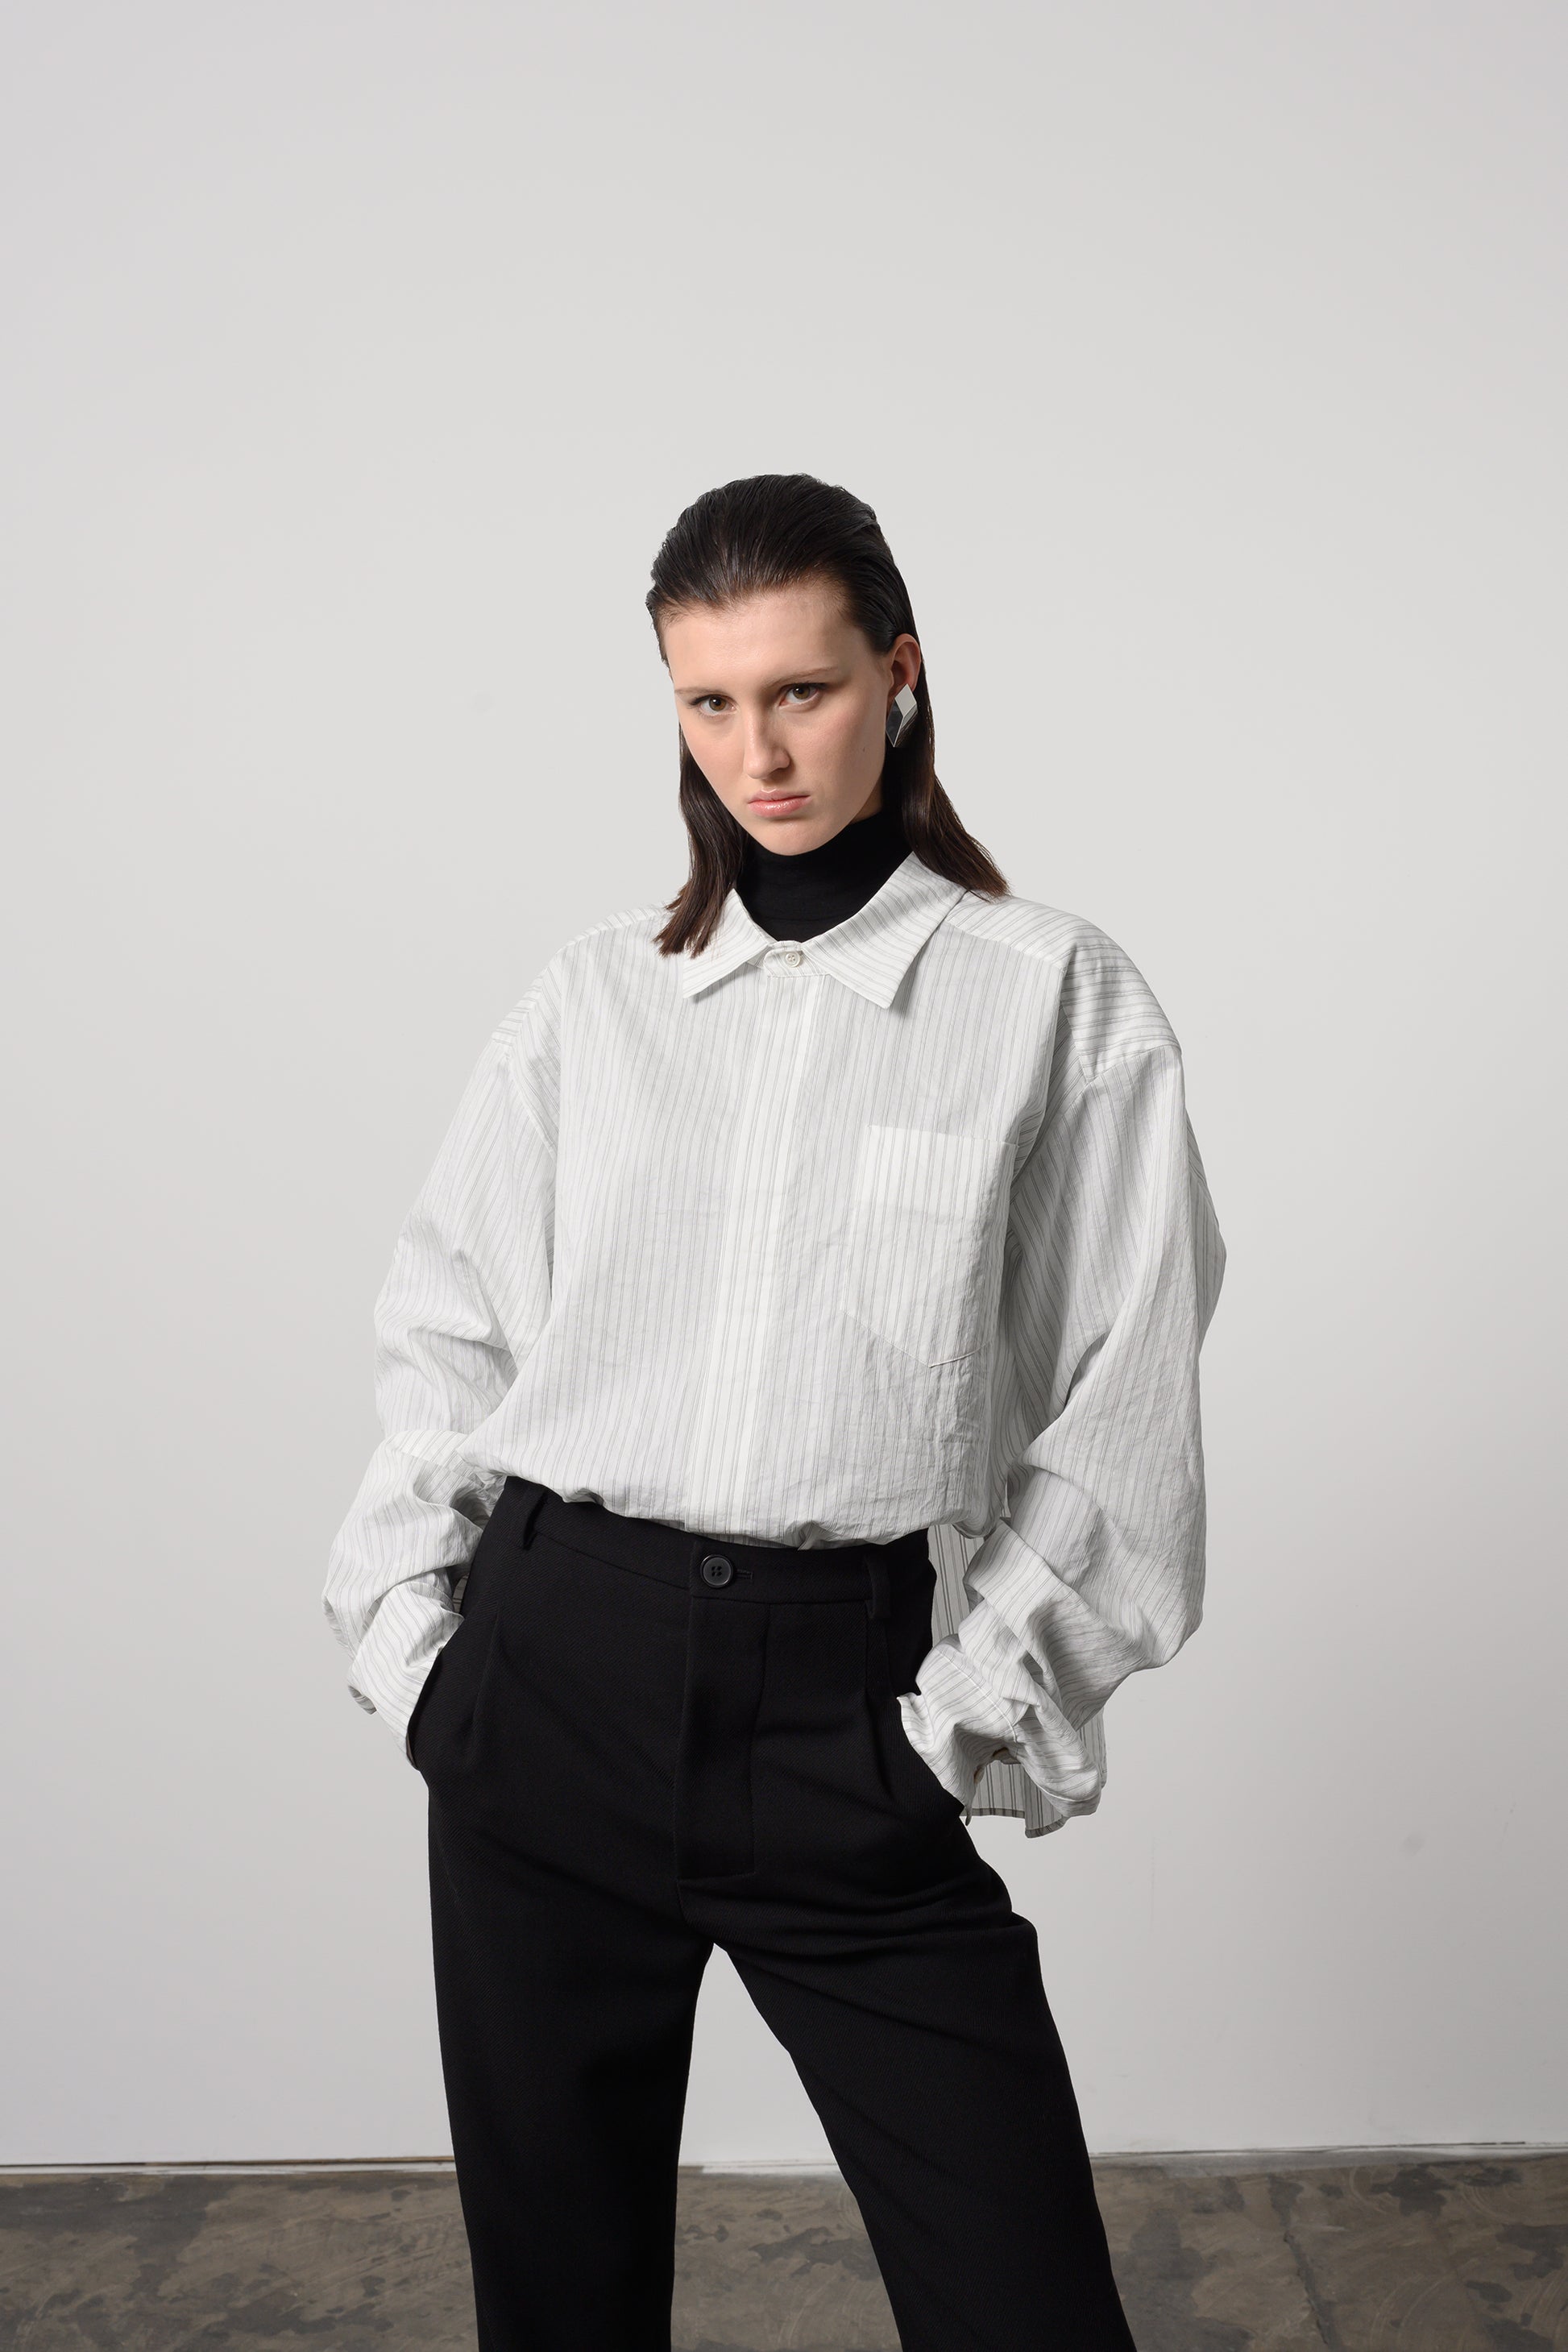 Model Zoe wears an elegant oversized cotton silk shirt with a classic collar and subtle striped pattern, ideal for both casual and formal wear.